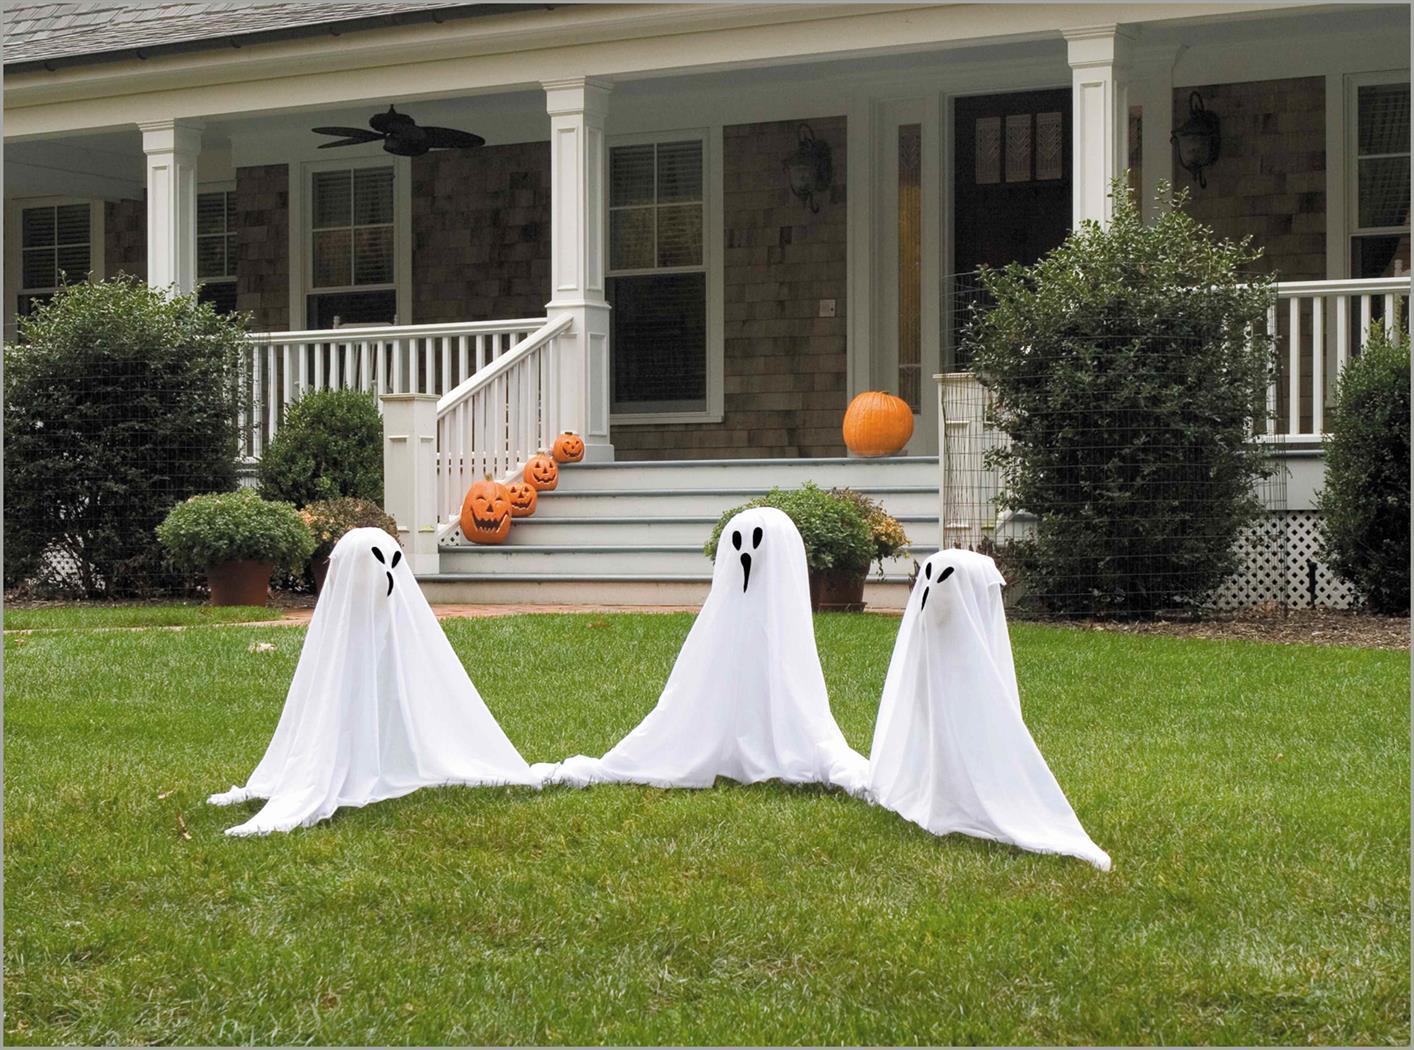 19" Tall Light Up Lawn Ghosts Outdoor Halloween Decoration  PartyBell.com